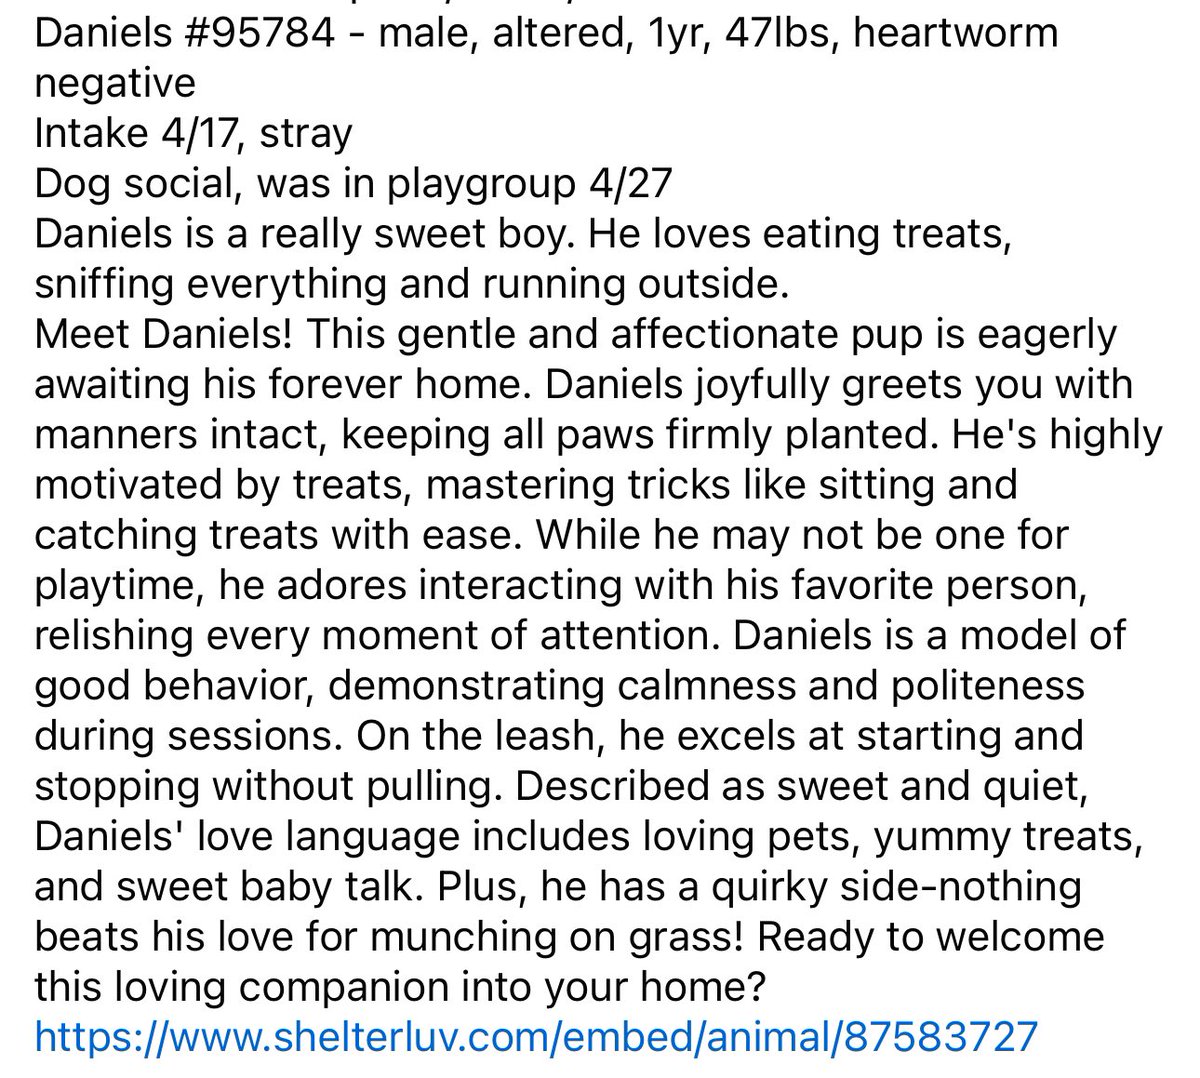 GCAC has negative kennel space 💔
🌟 Meet Daniels ! 
‼️ Needs placement ASAP
⭐️ See photo for contact info and 
      details about this sweet boy! 
📍 #YeahTHATGreenville, 
      #SouthCarolina 
@G4TXNYCpups @Dubs4Mutts